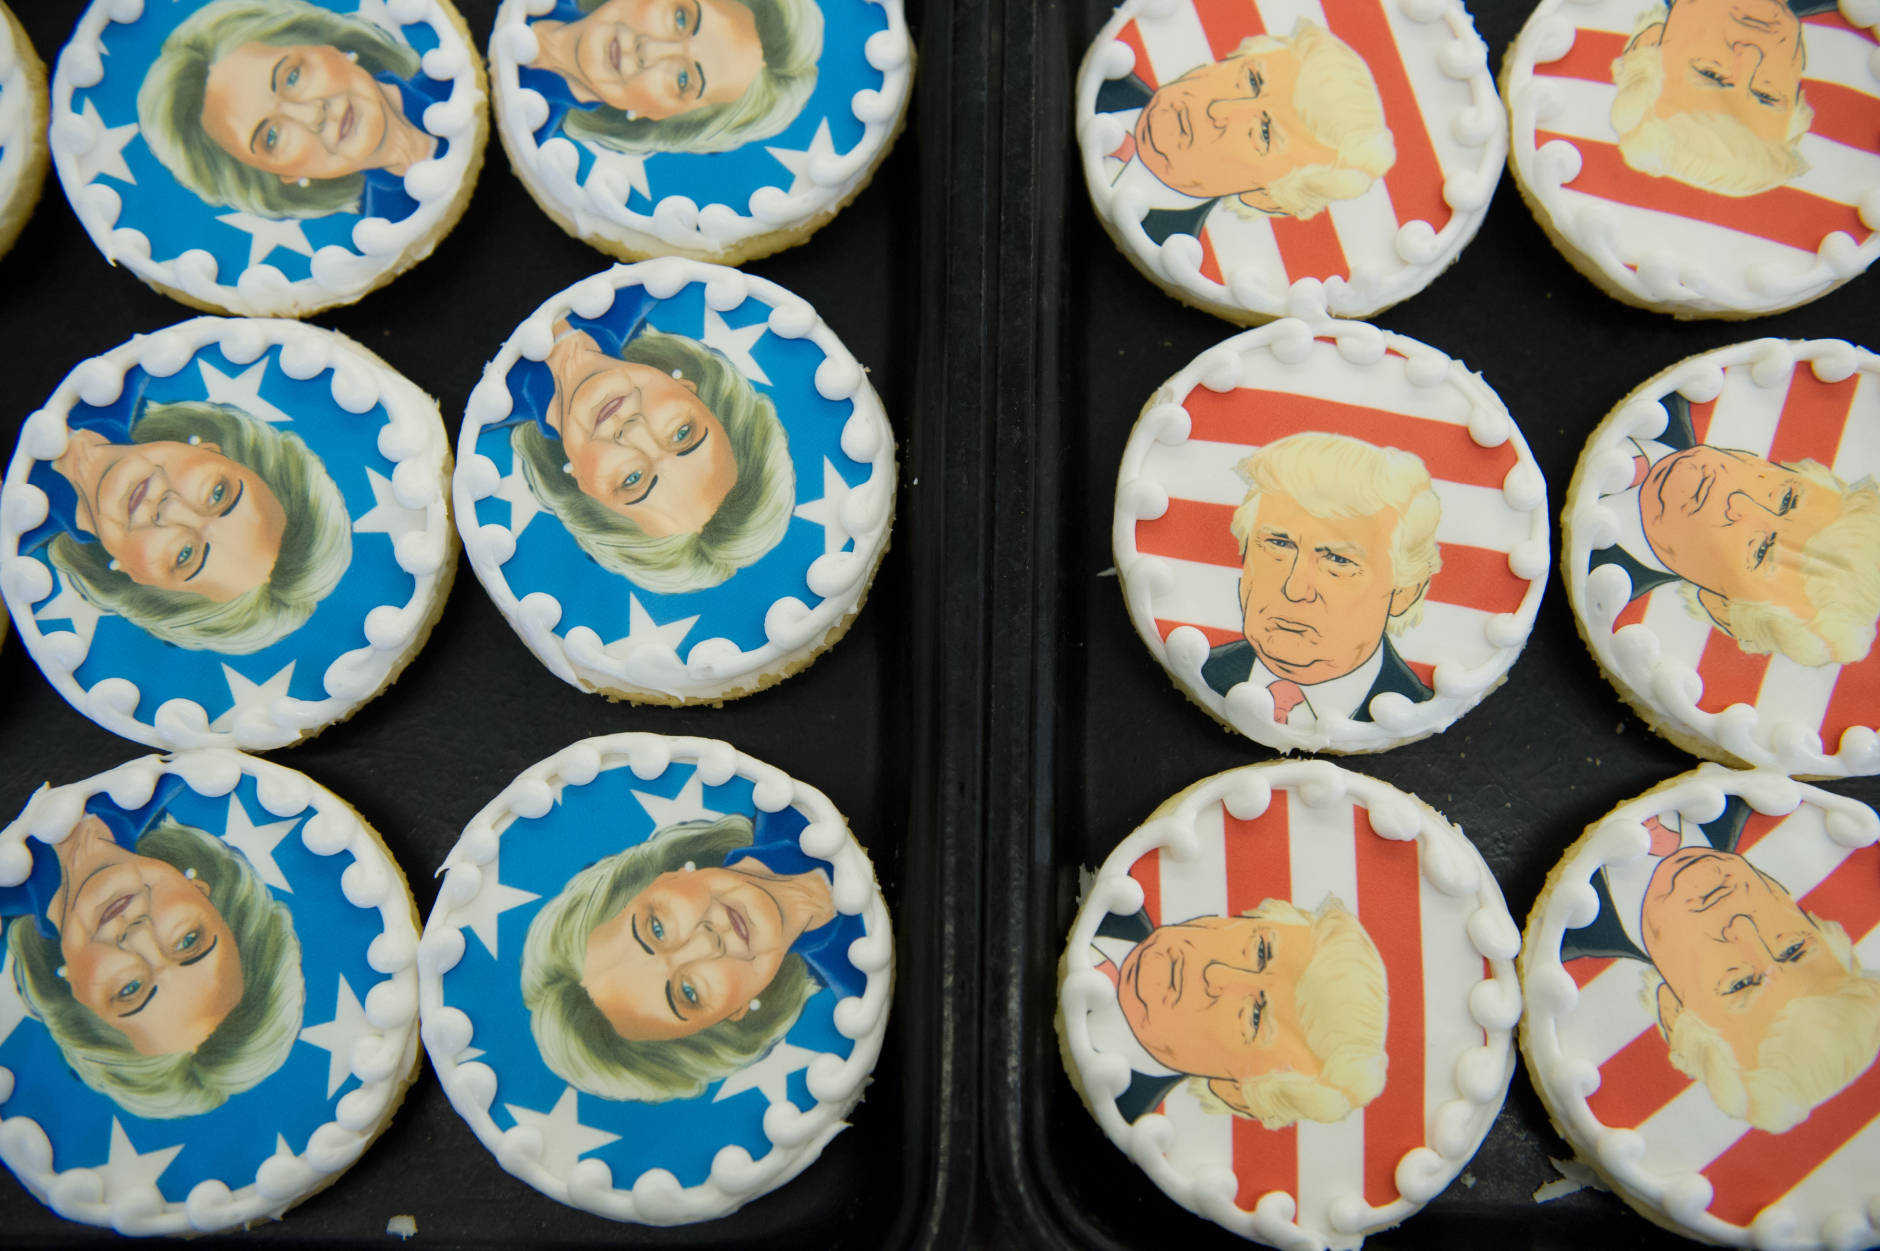 OAKMONT, PA - NOVEMBER 8: Donald Trump and Hillary Clinton cookies are on sale at the Oakmont Bakery on November 8, 2016 in Oakmont, Pennsylvania.  Trump leads the cookie-purchase tally with 63% of the purchases, with a total of 2609 Trump cookies and 1512 Hillary cookies sold as of election day as Americans go to the polls to decide on their next president.  (Photo by Jeff Swensen/Getty Images)